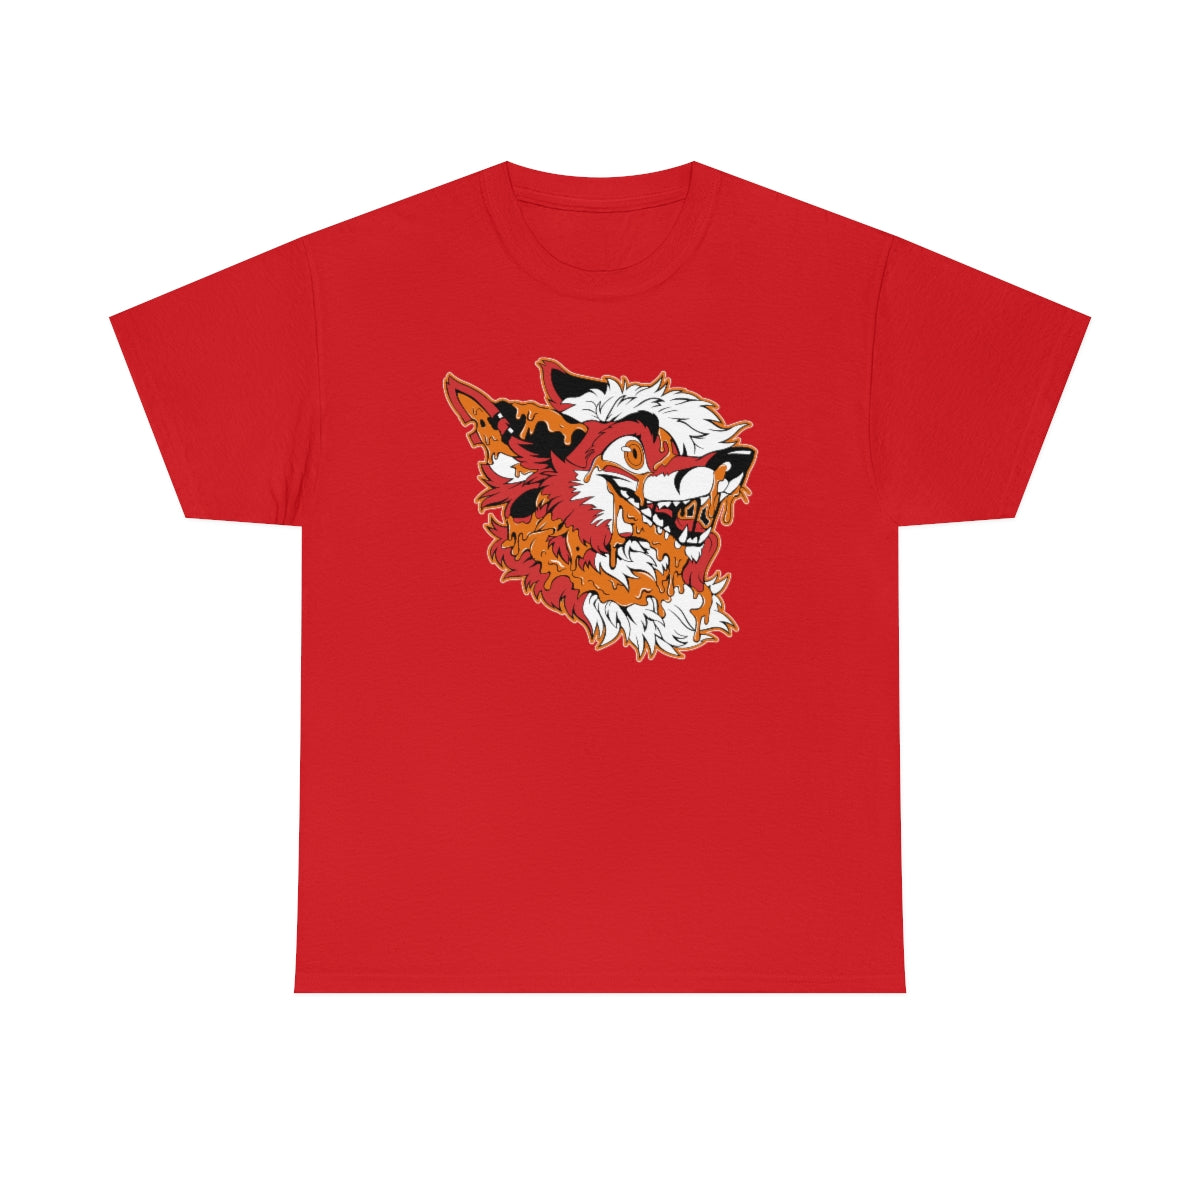 Red and Orange - T-Shirt T-Shirt Artworktee Red S 